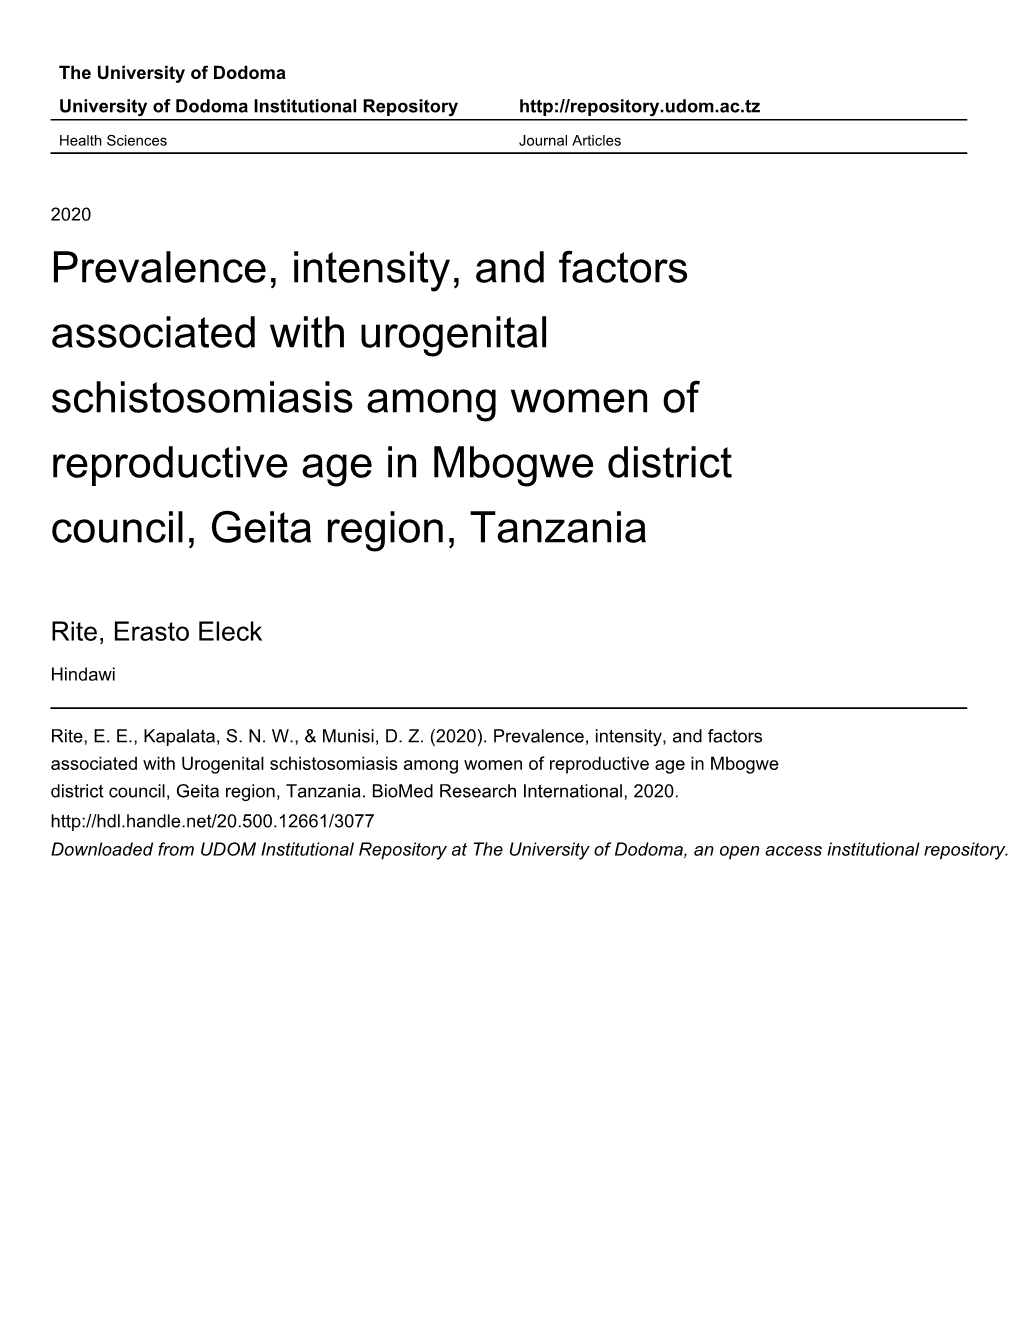 Prevalence, Intensity, and Factors Associated with Urogenital Schistosomiasis Among Women of Reproductive Age in Mbogwe District Council, Geita Region, Tanzania